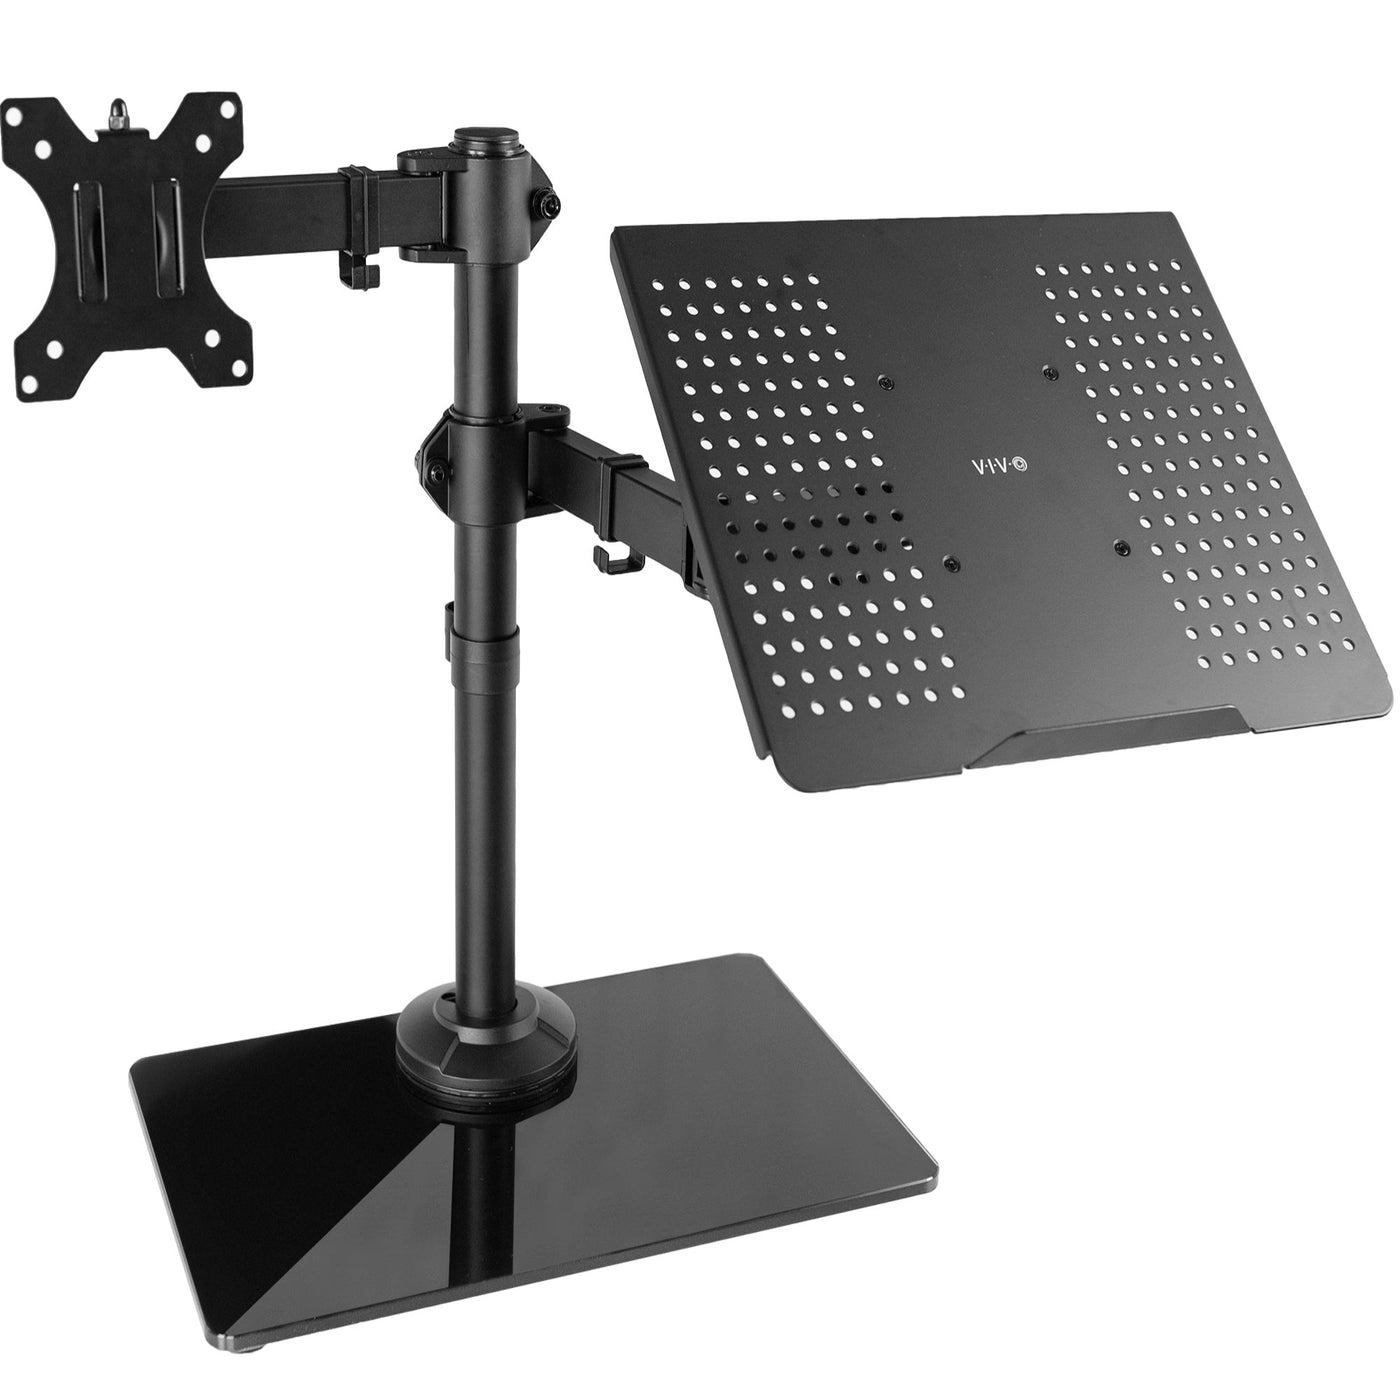 safwe Monitor Stand - Desktop Display Stand with Height Adjustable